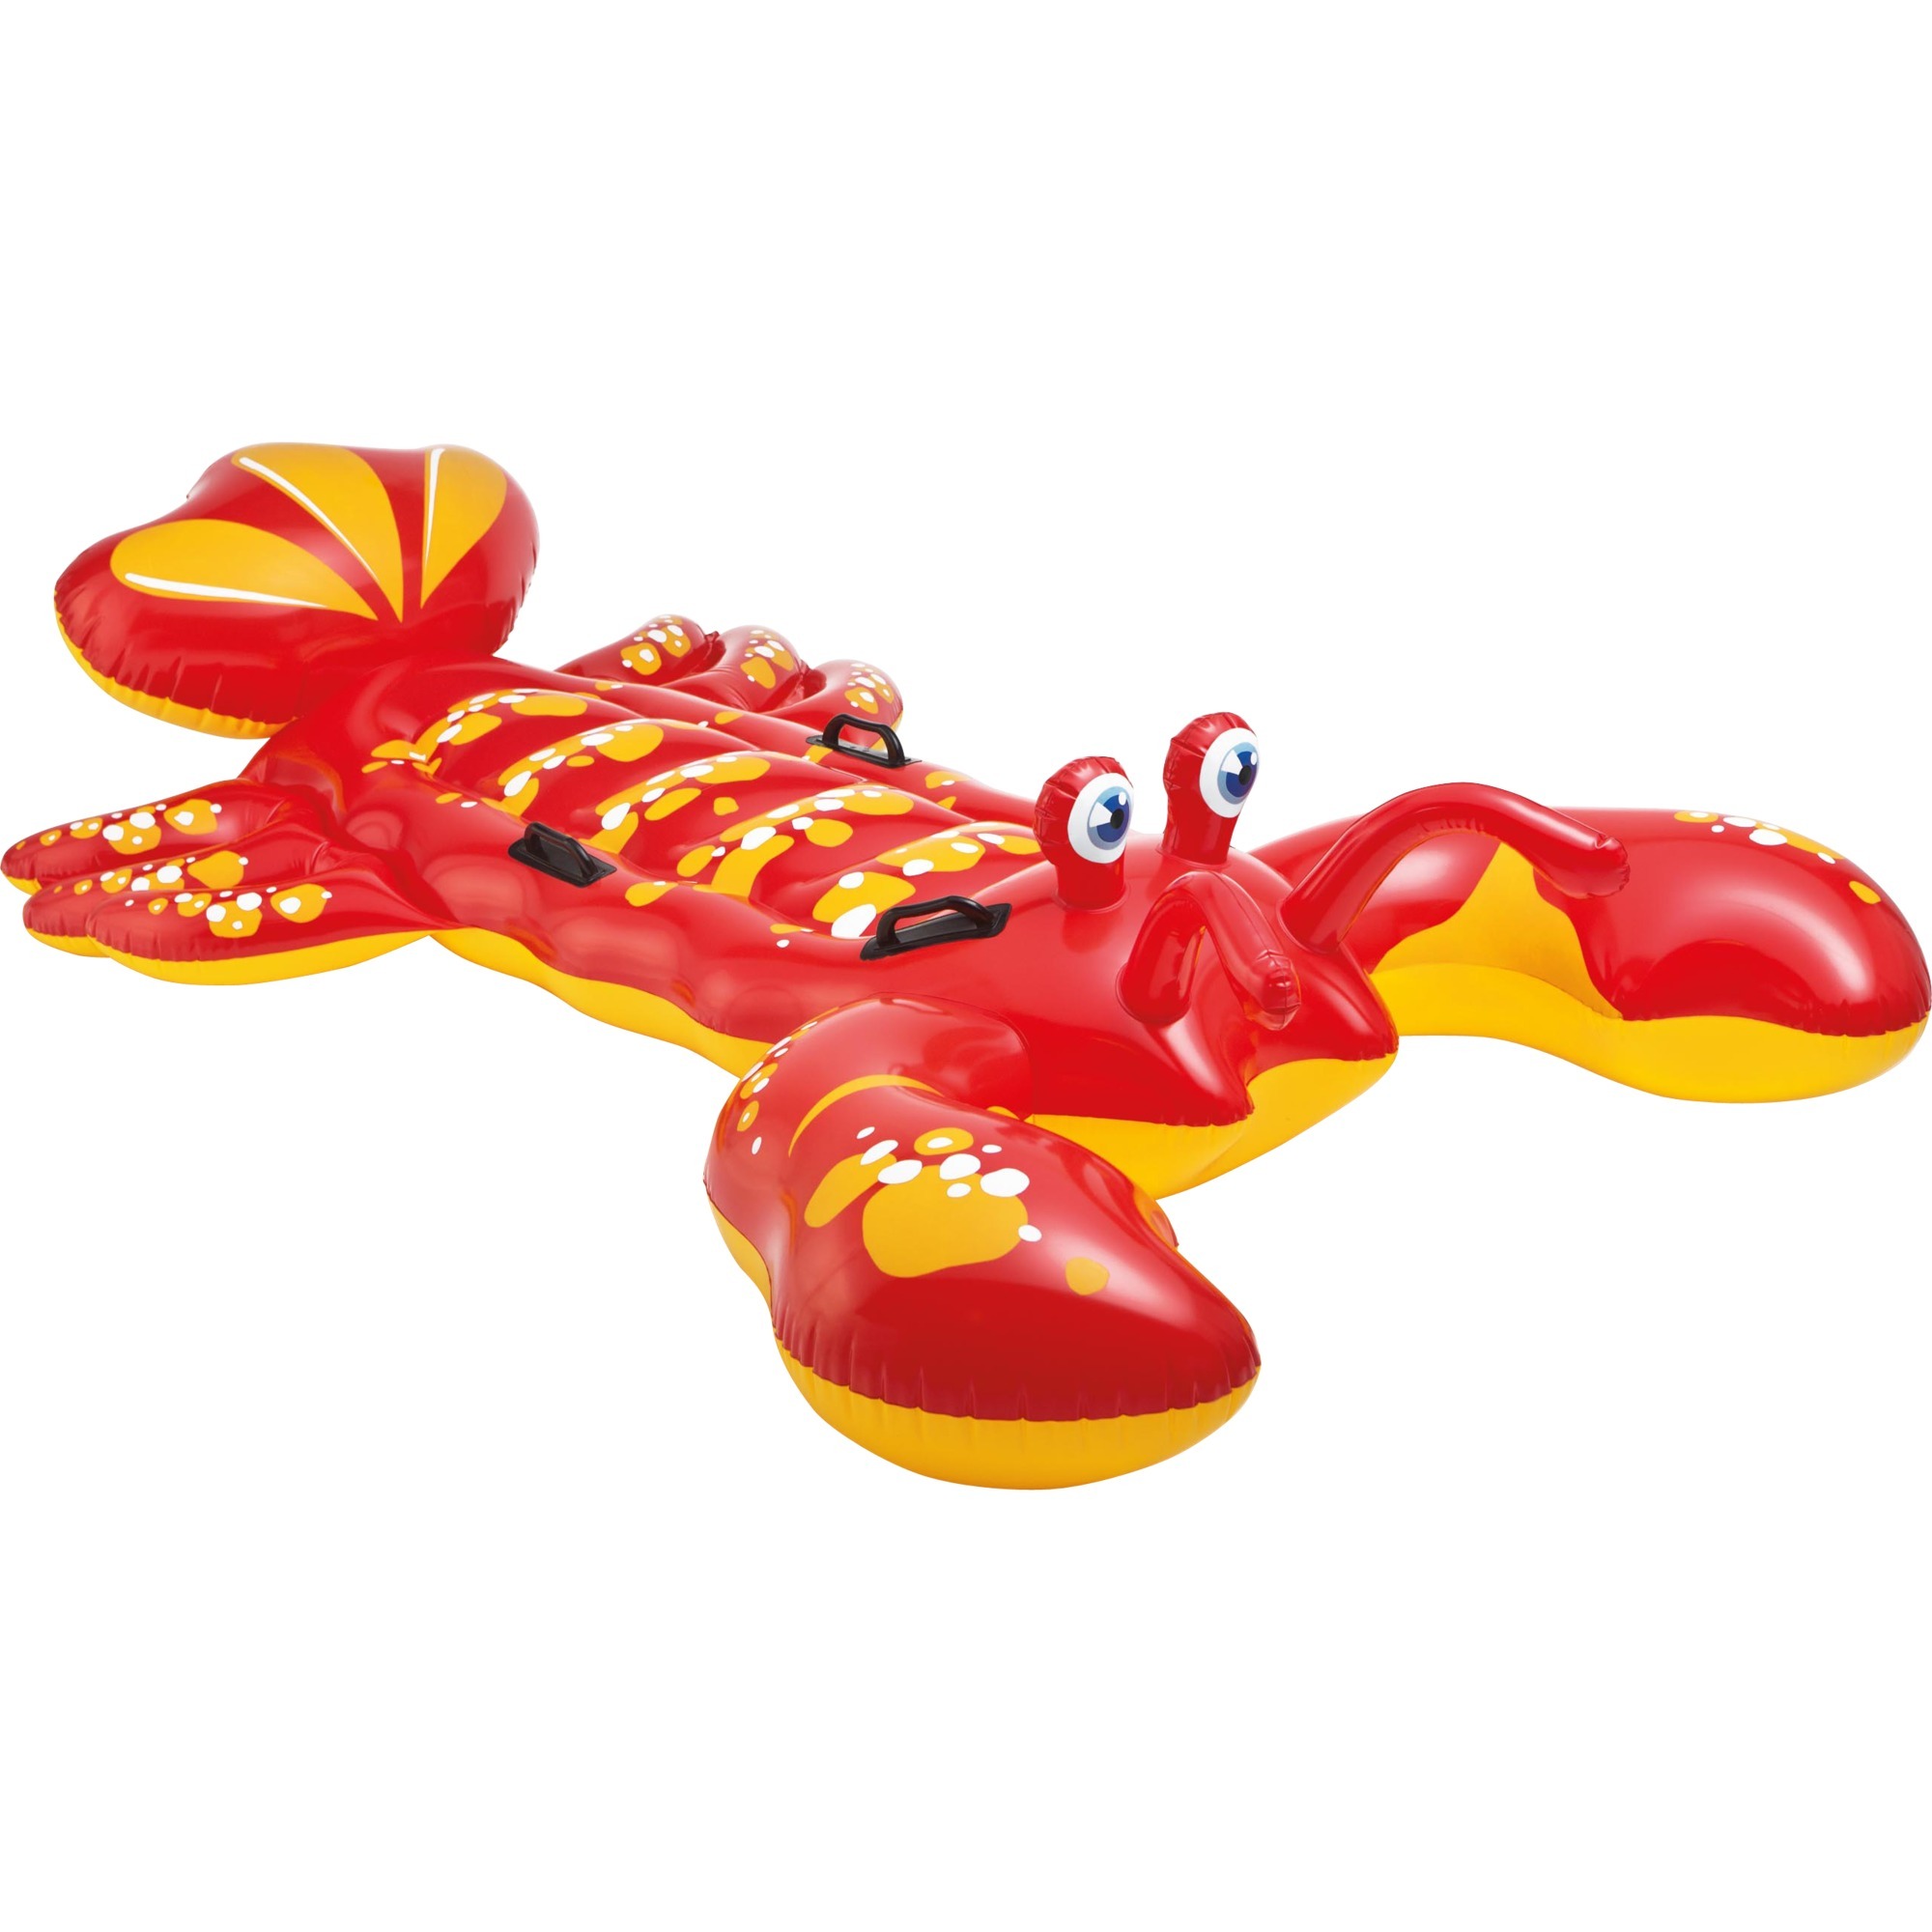 157528NP, Inflatable products